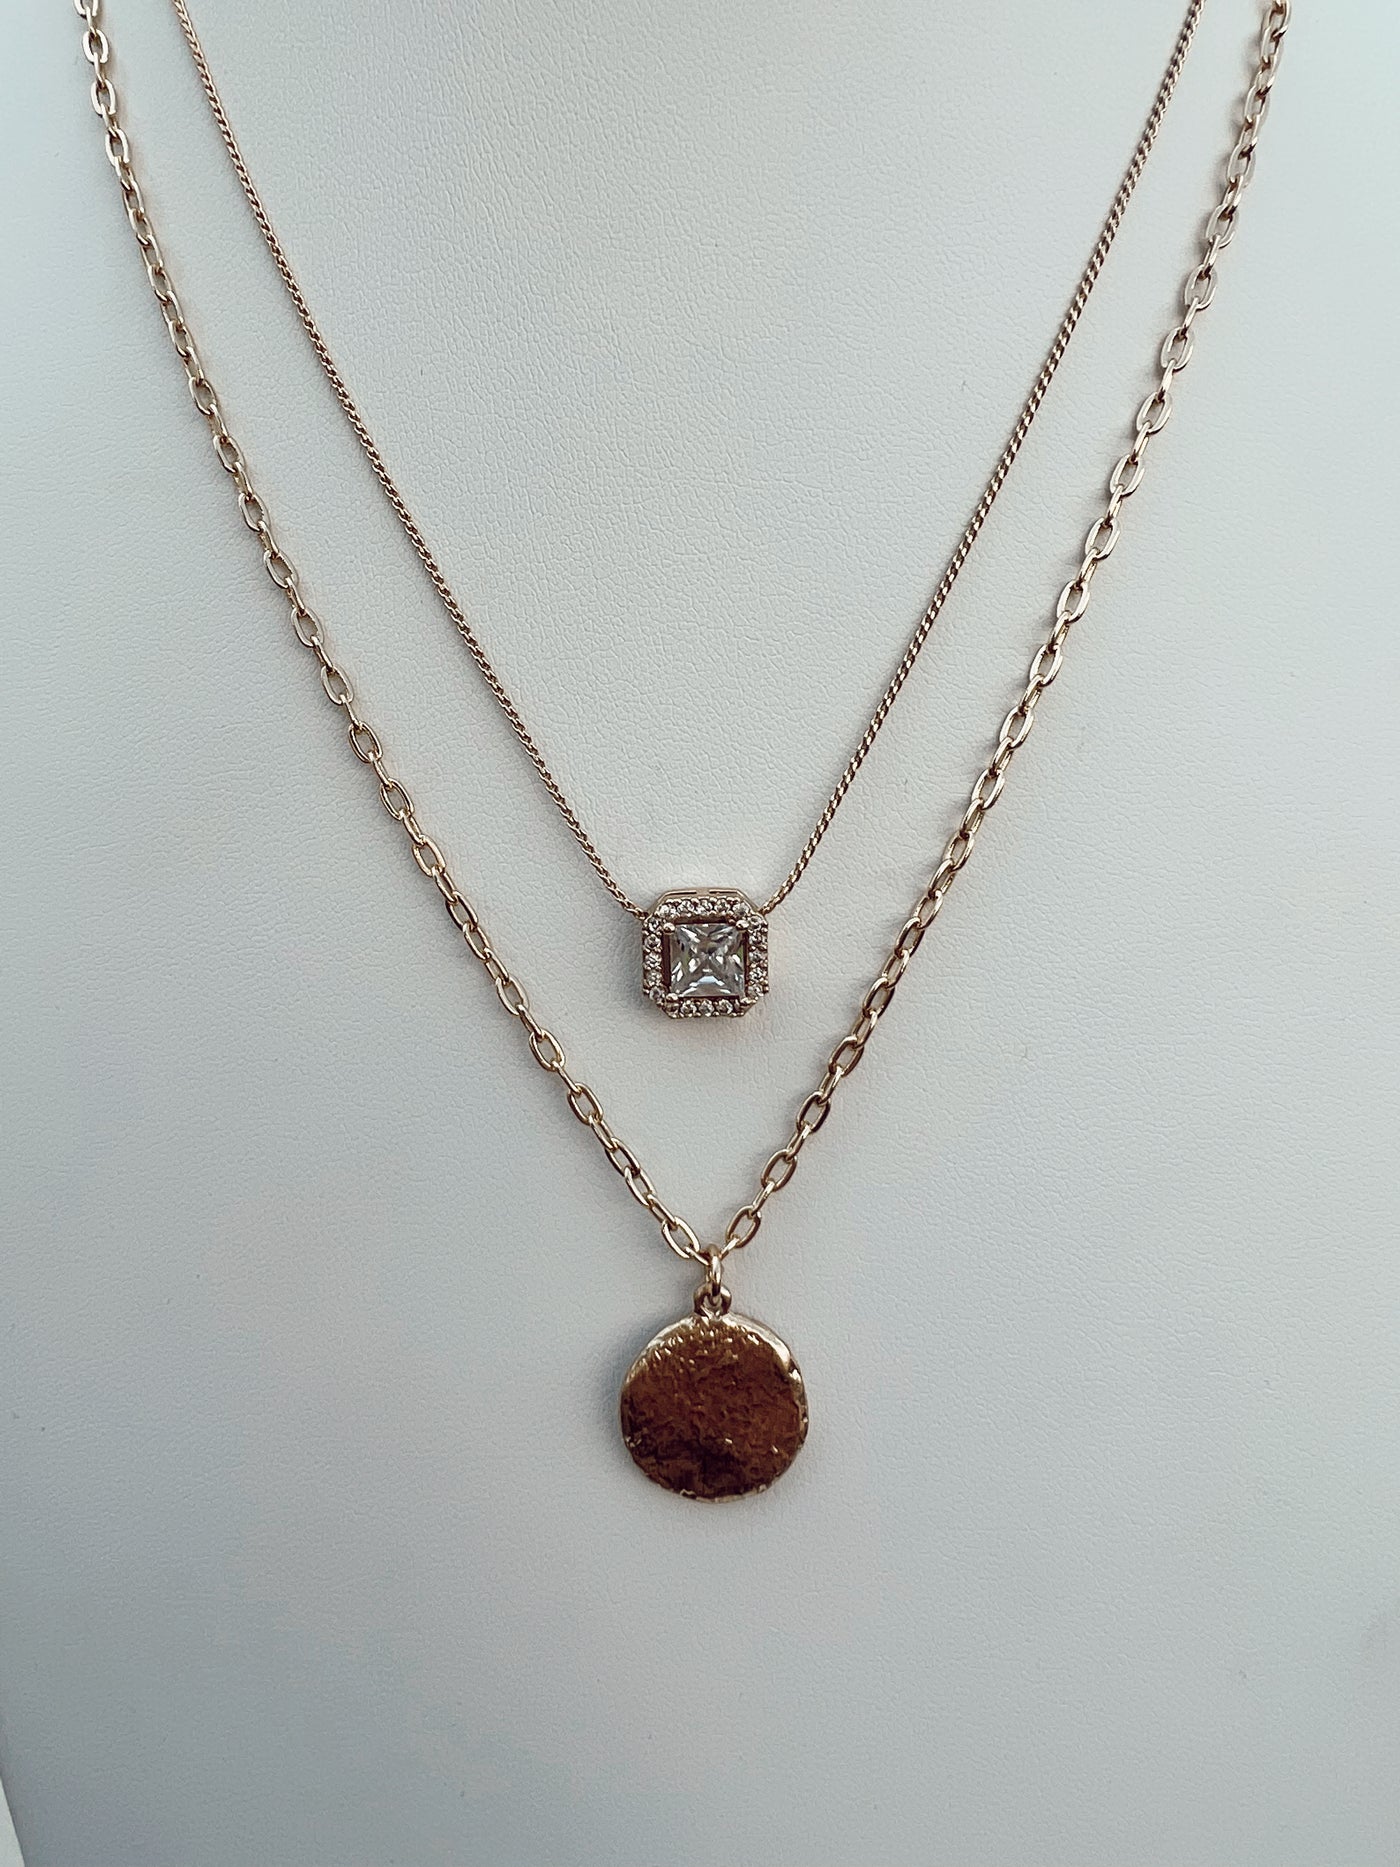 Without Words - Multi Chain Pendant Necklace